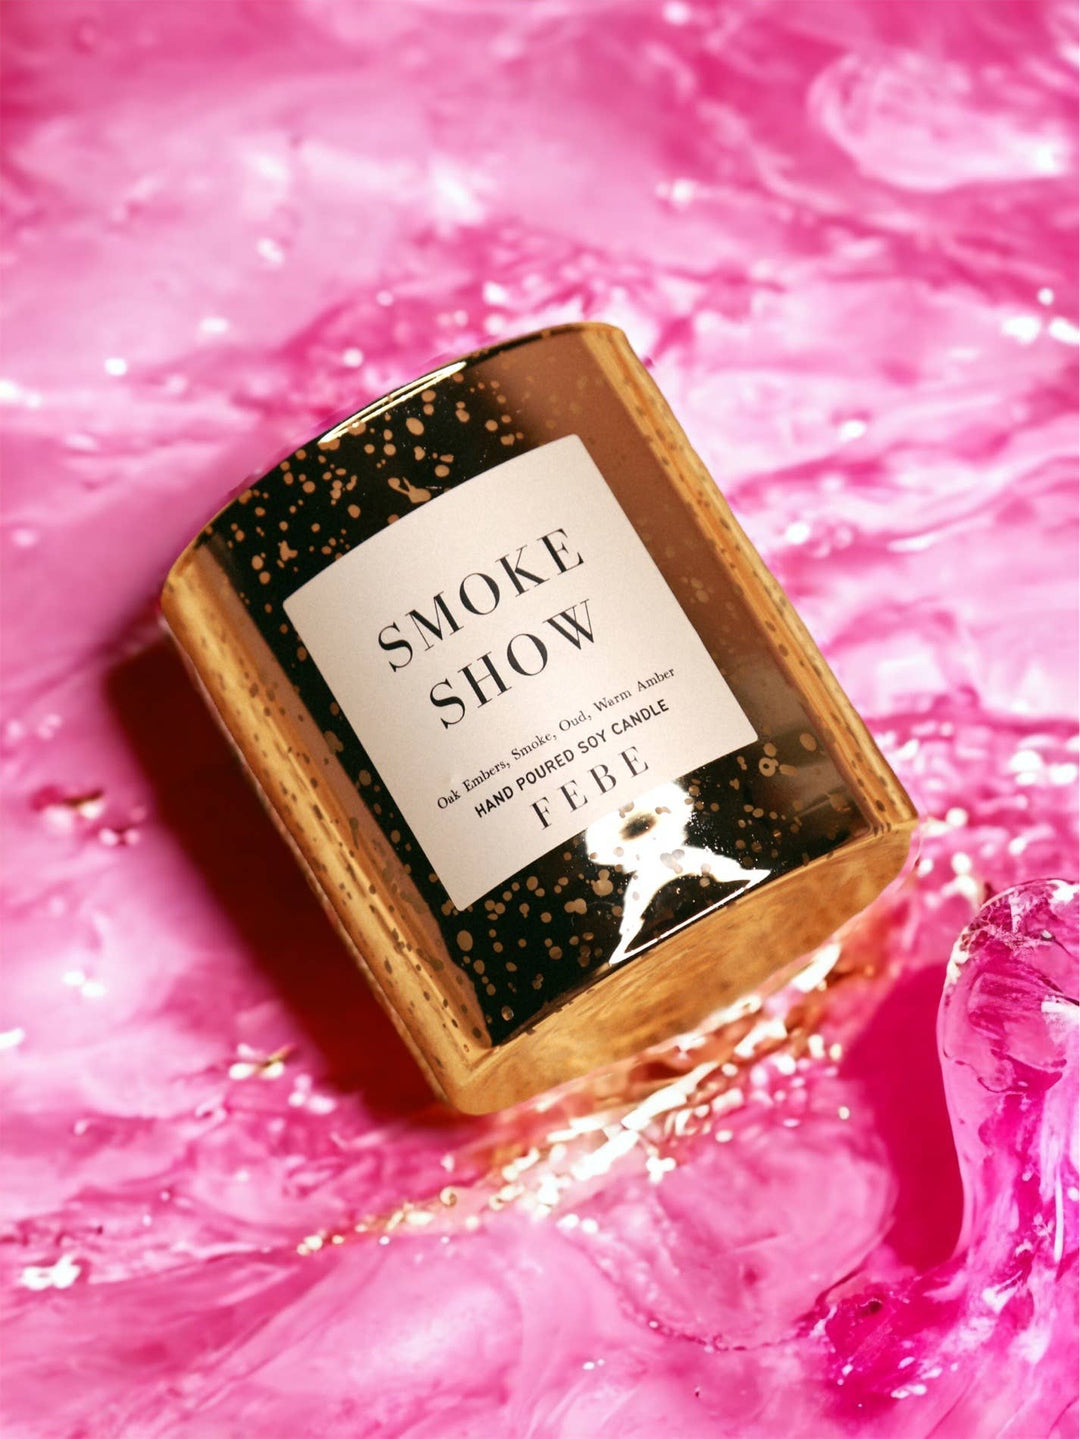 Smoke Show Gold Glass Freckled Candle - ShopSpoiled